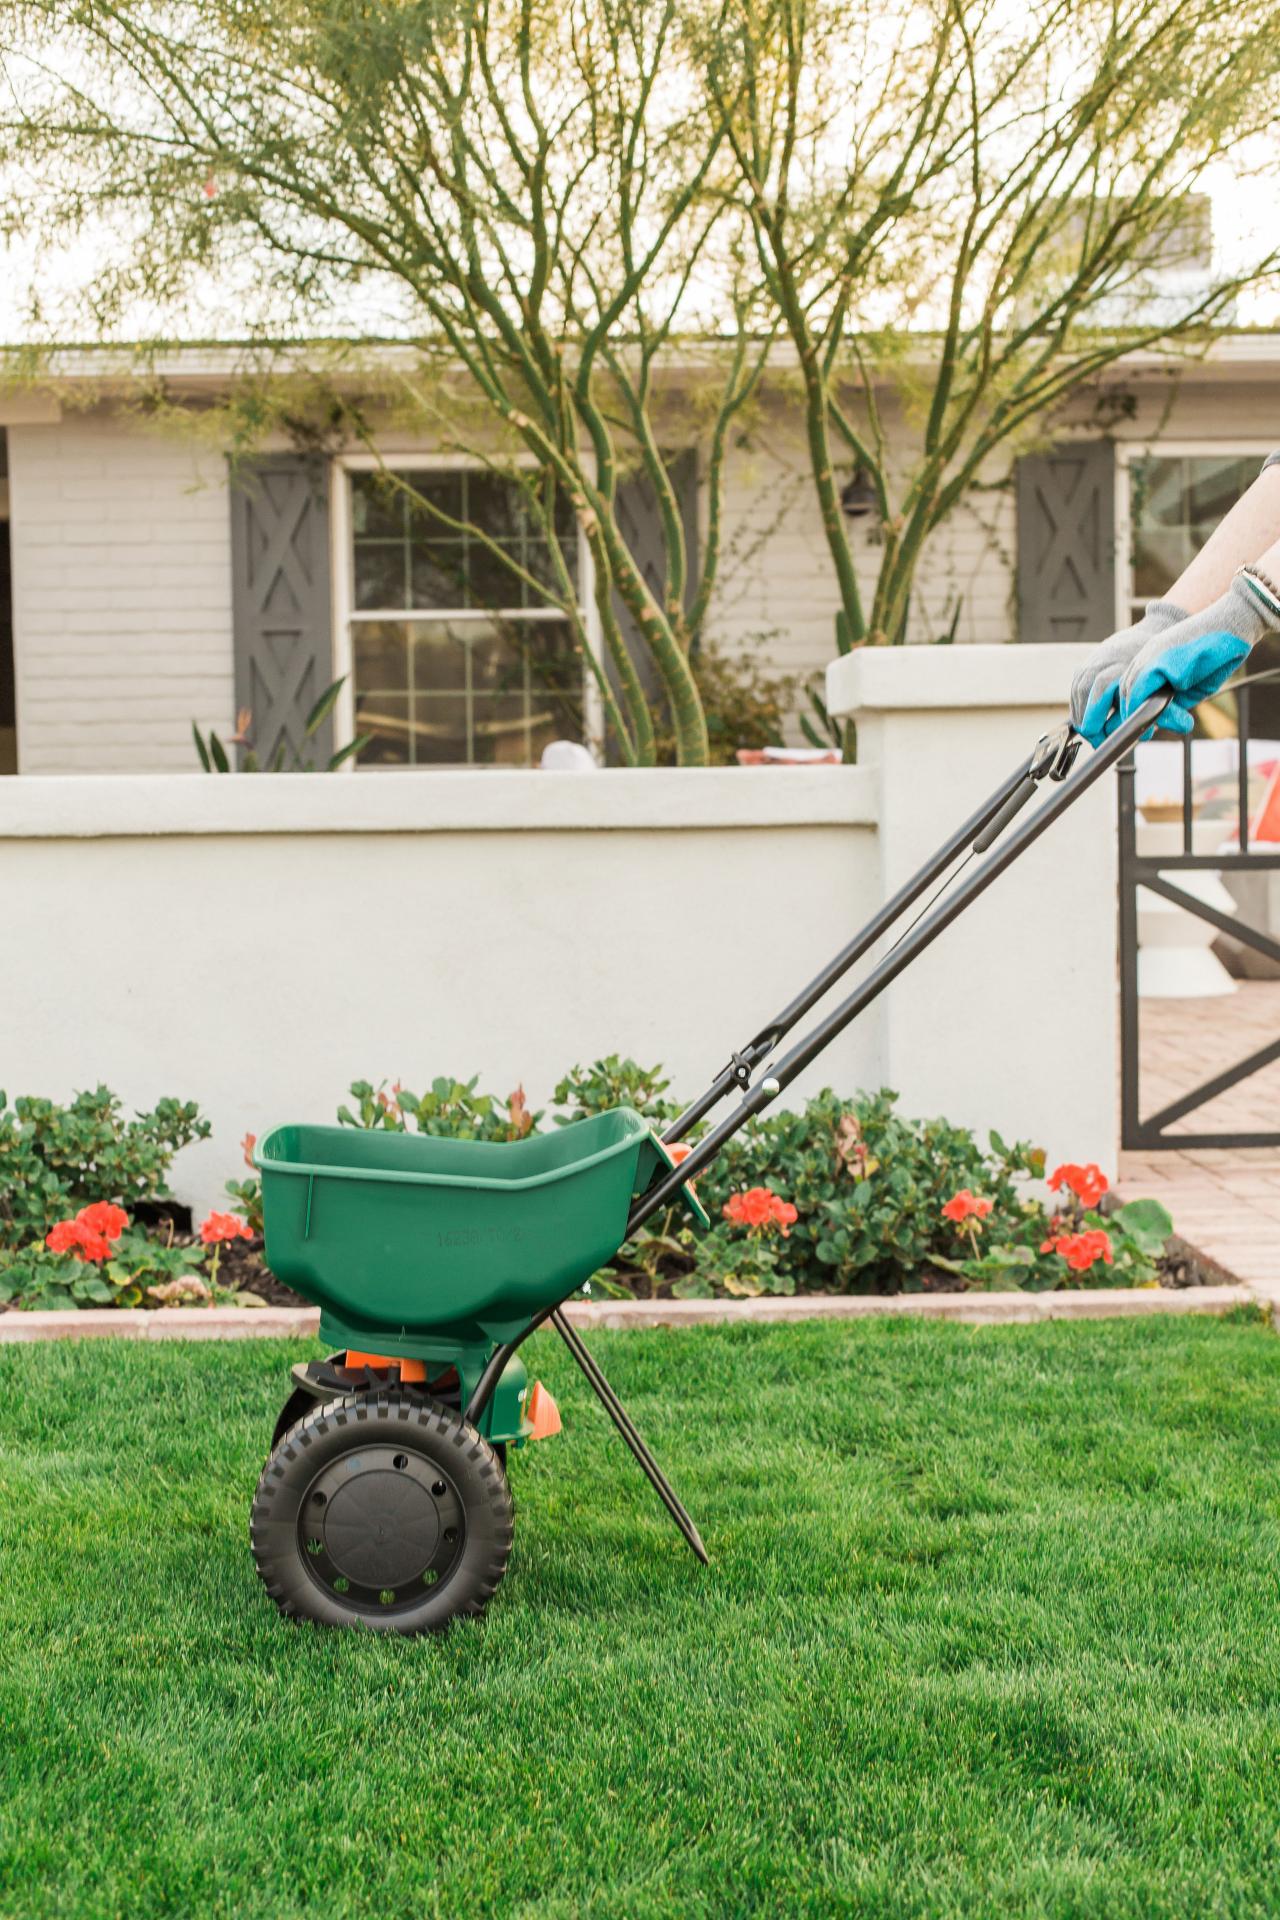 How to Seed Your Lawn This Winter